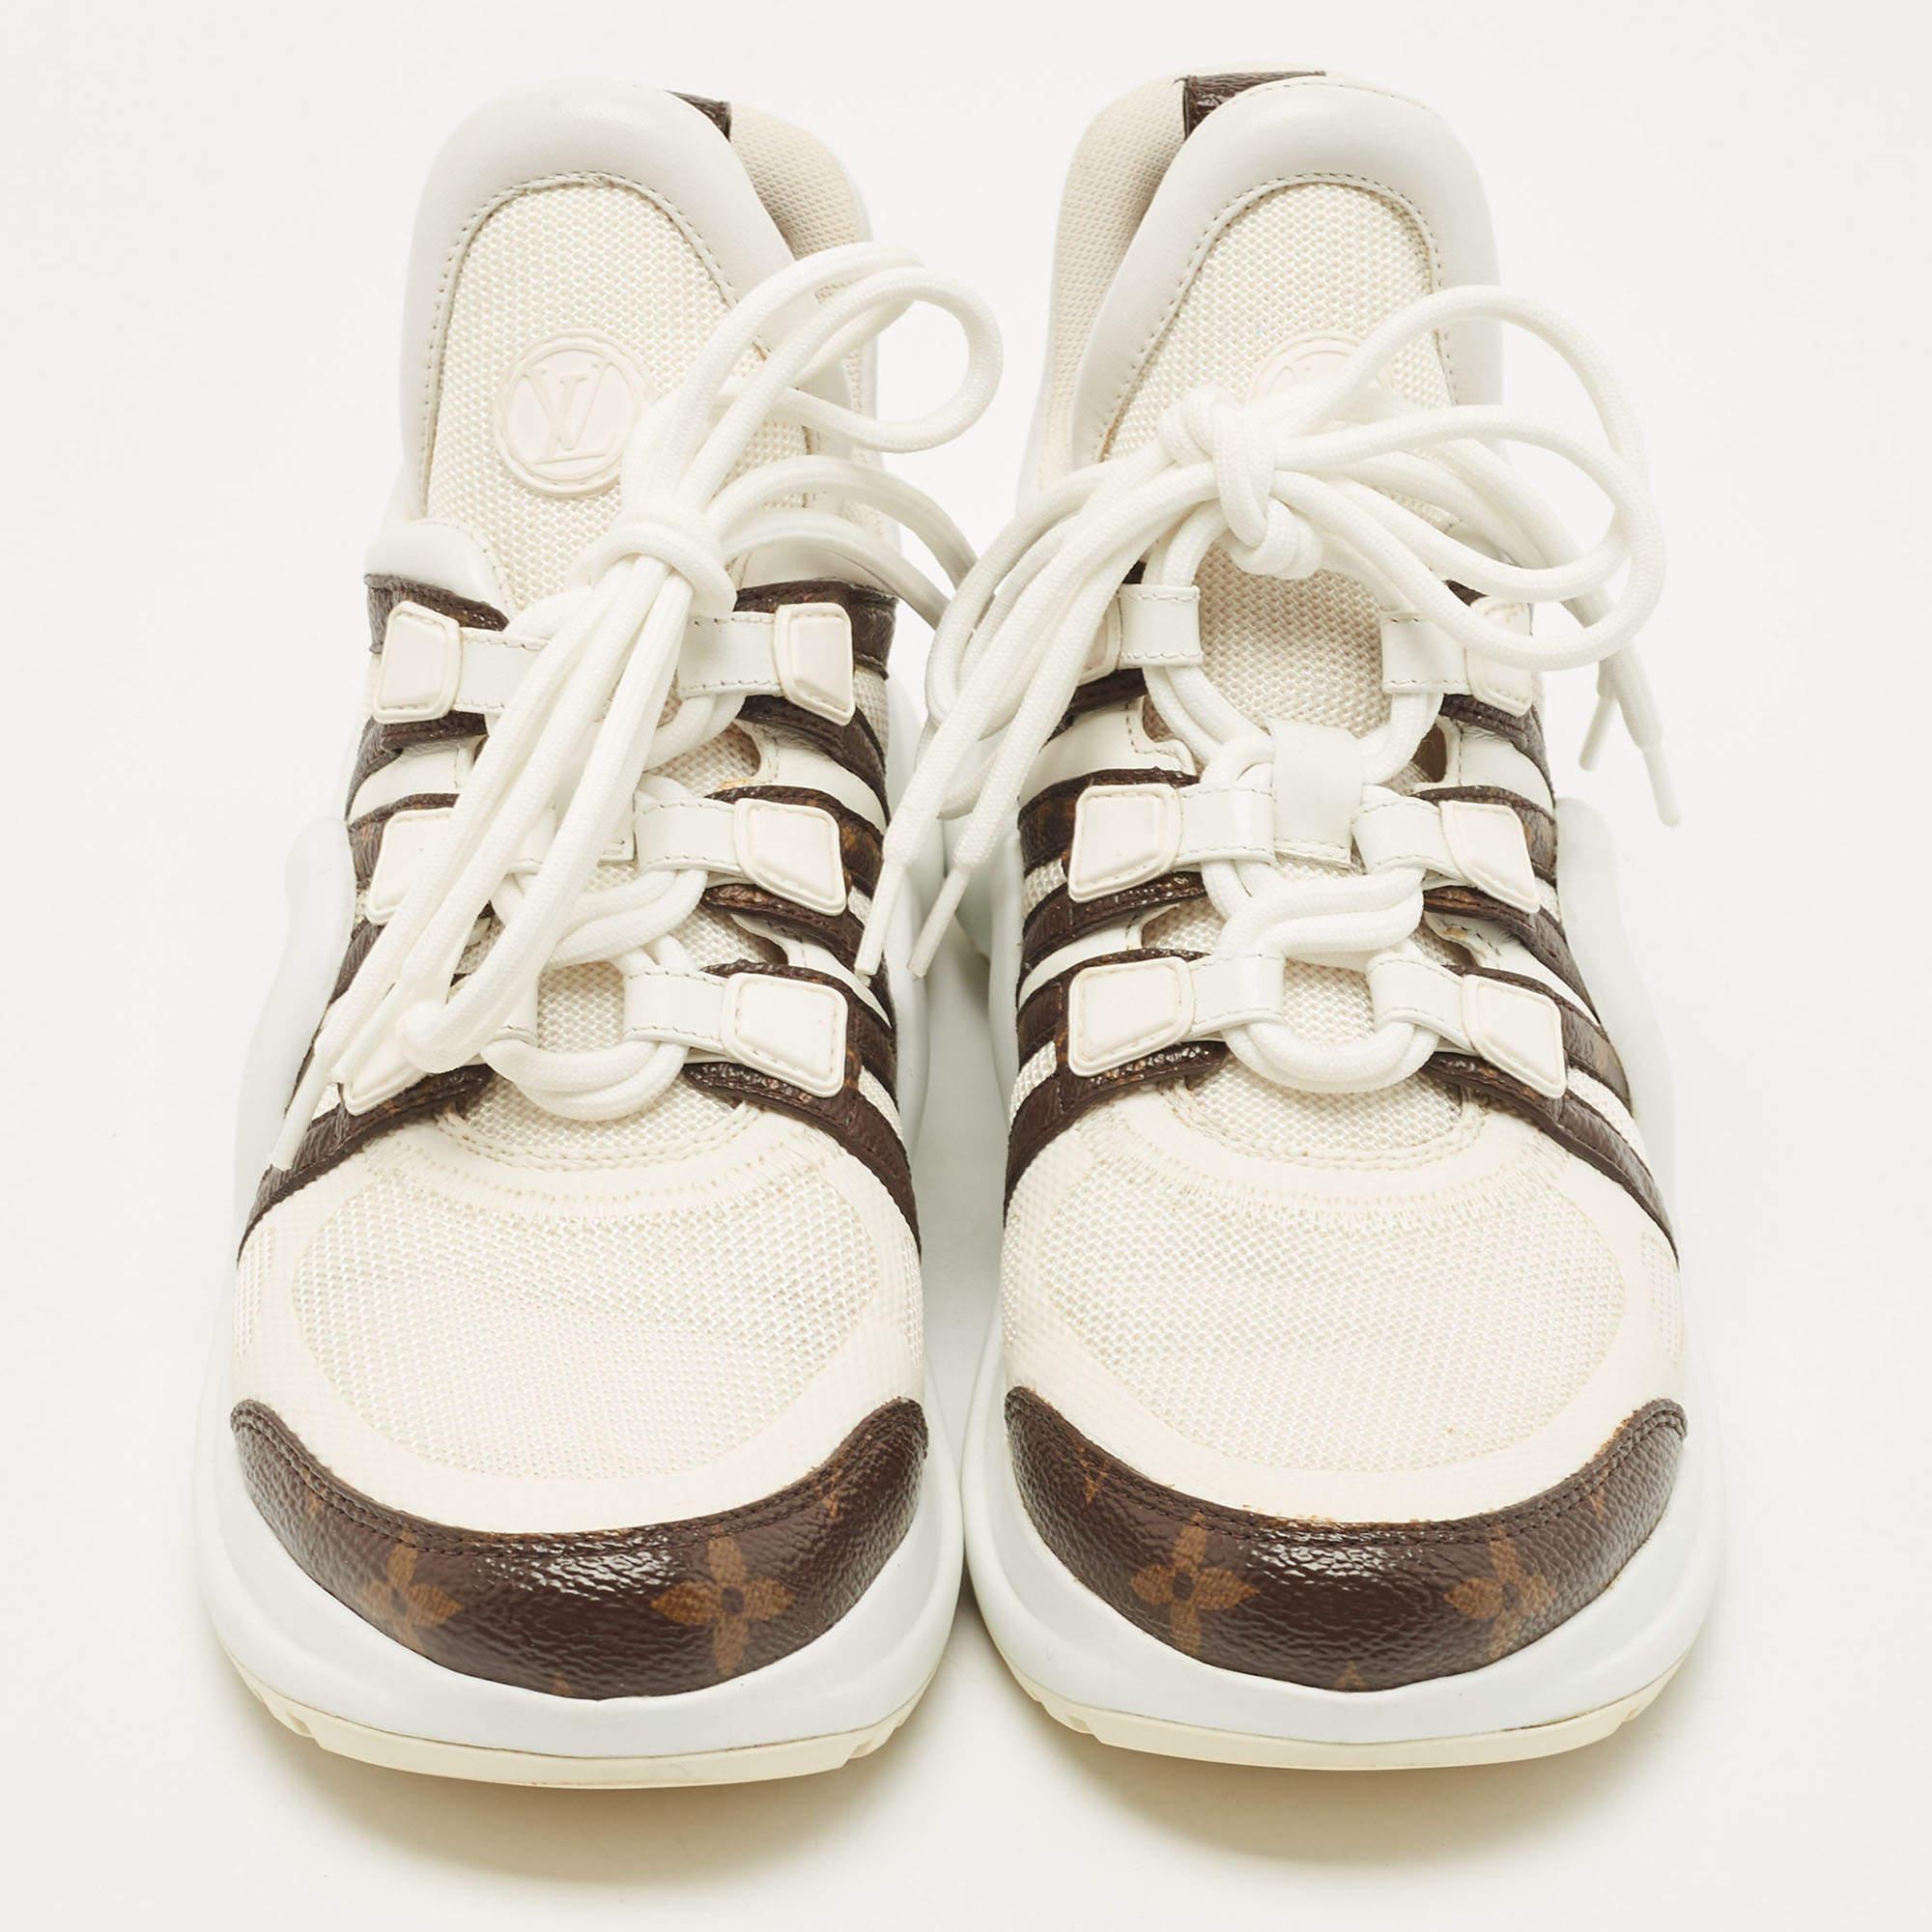 Louis Vuitton Runway Sneakers Womens Size 37 White Brown leather